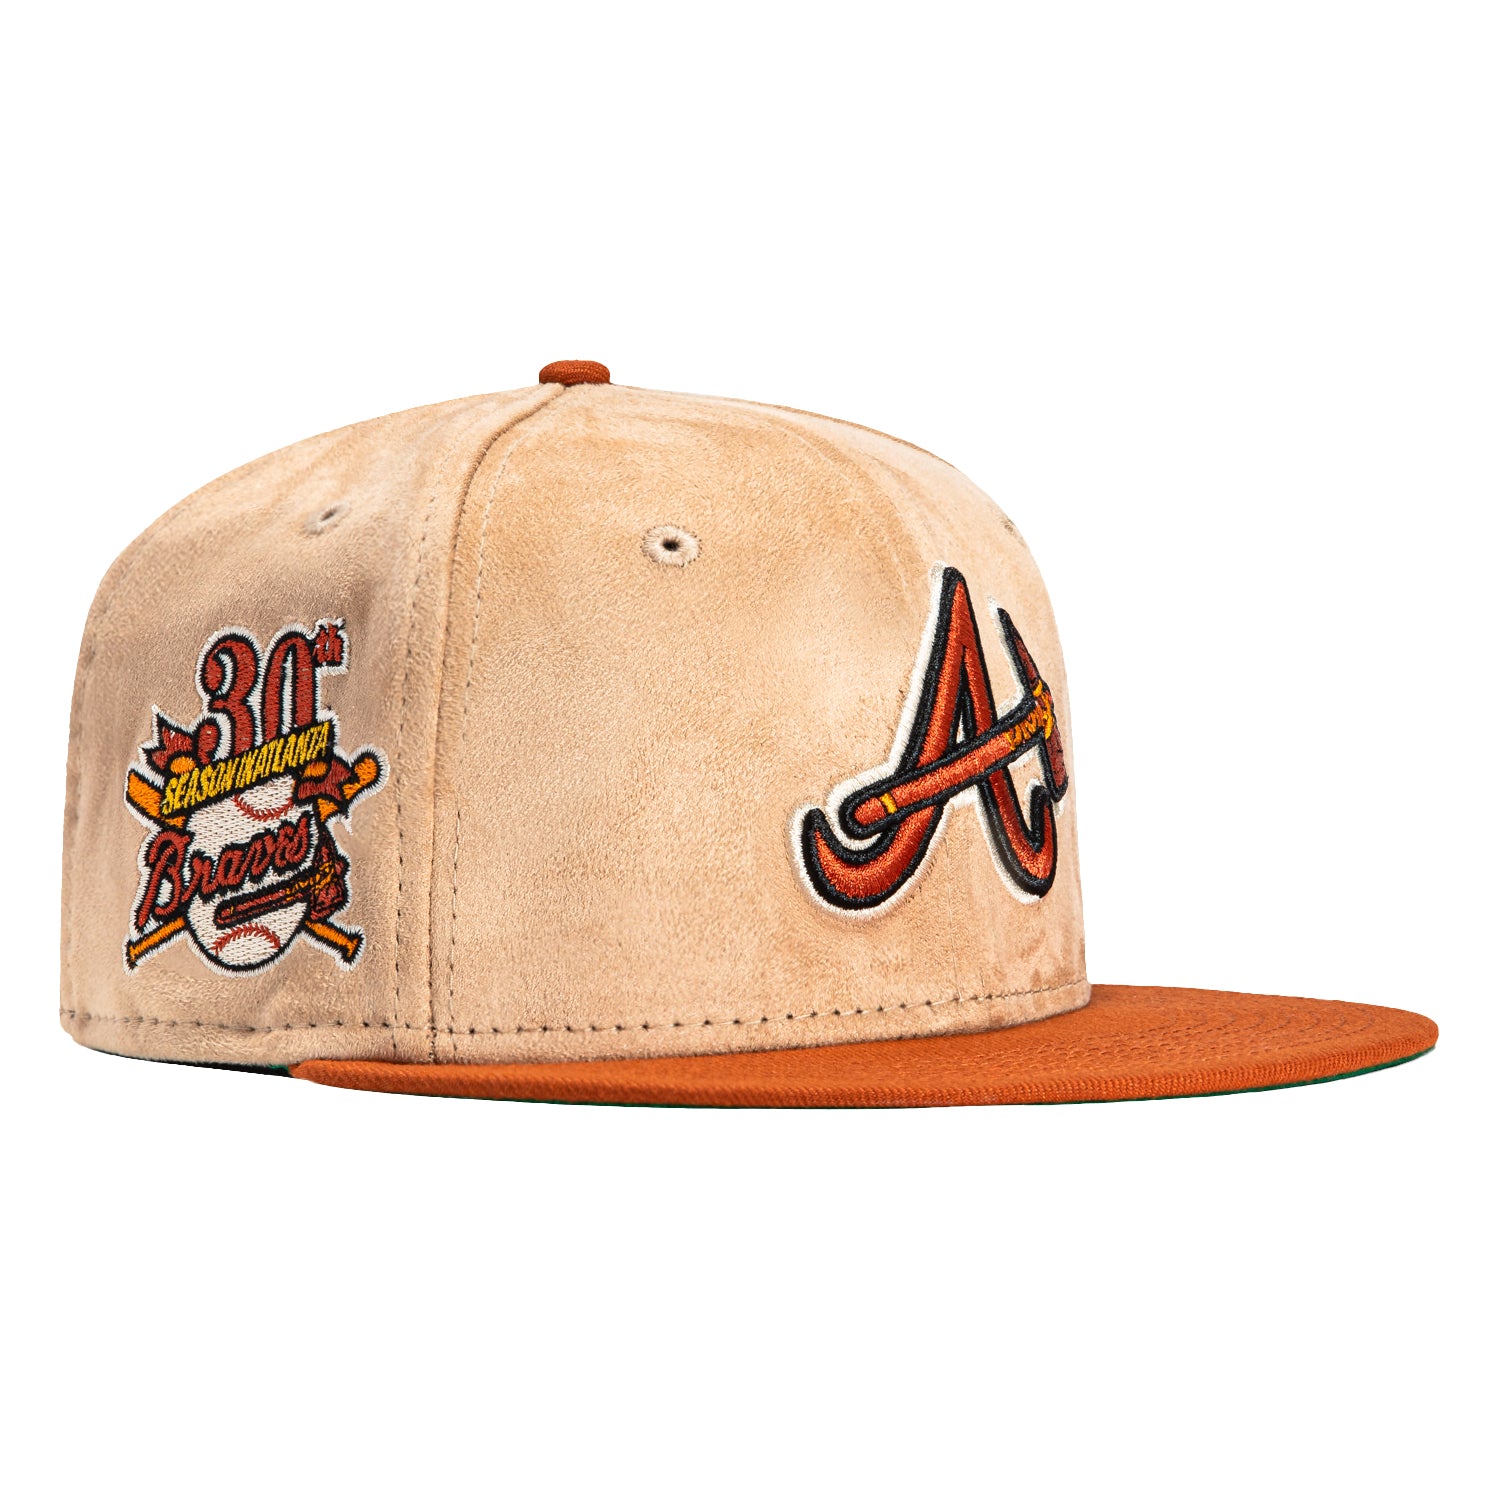 New Era x Just Don Atlanta Braves MLB 59FIFTY Unisex Fitted Cap